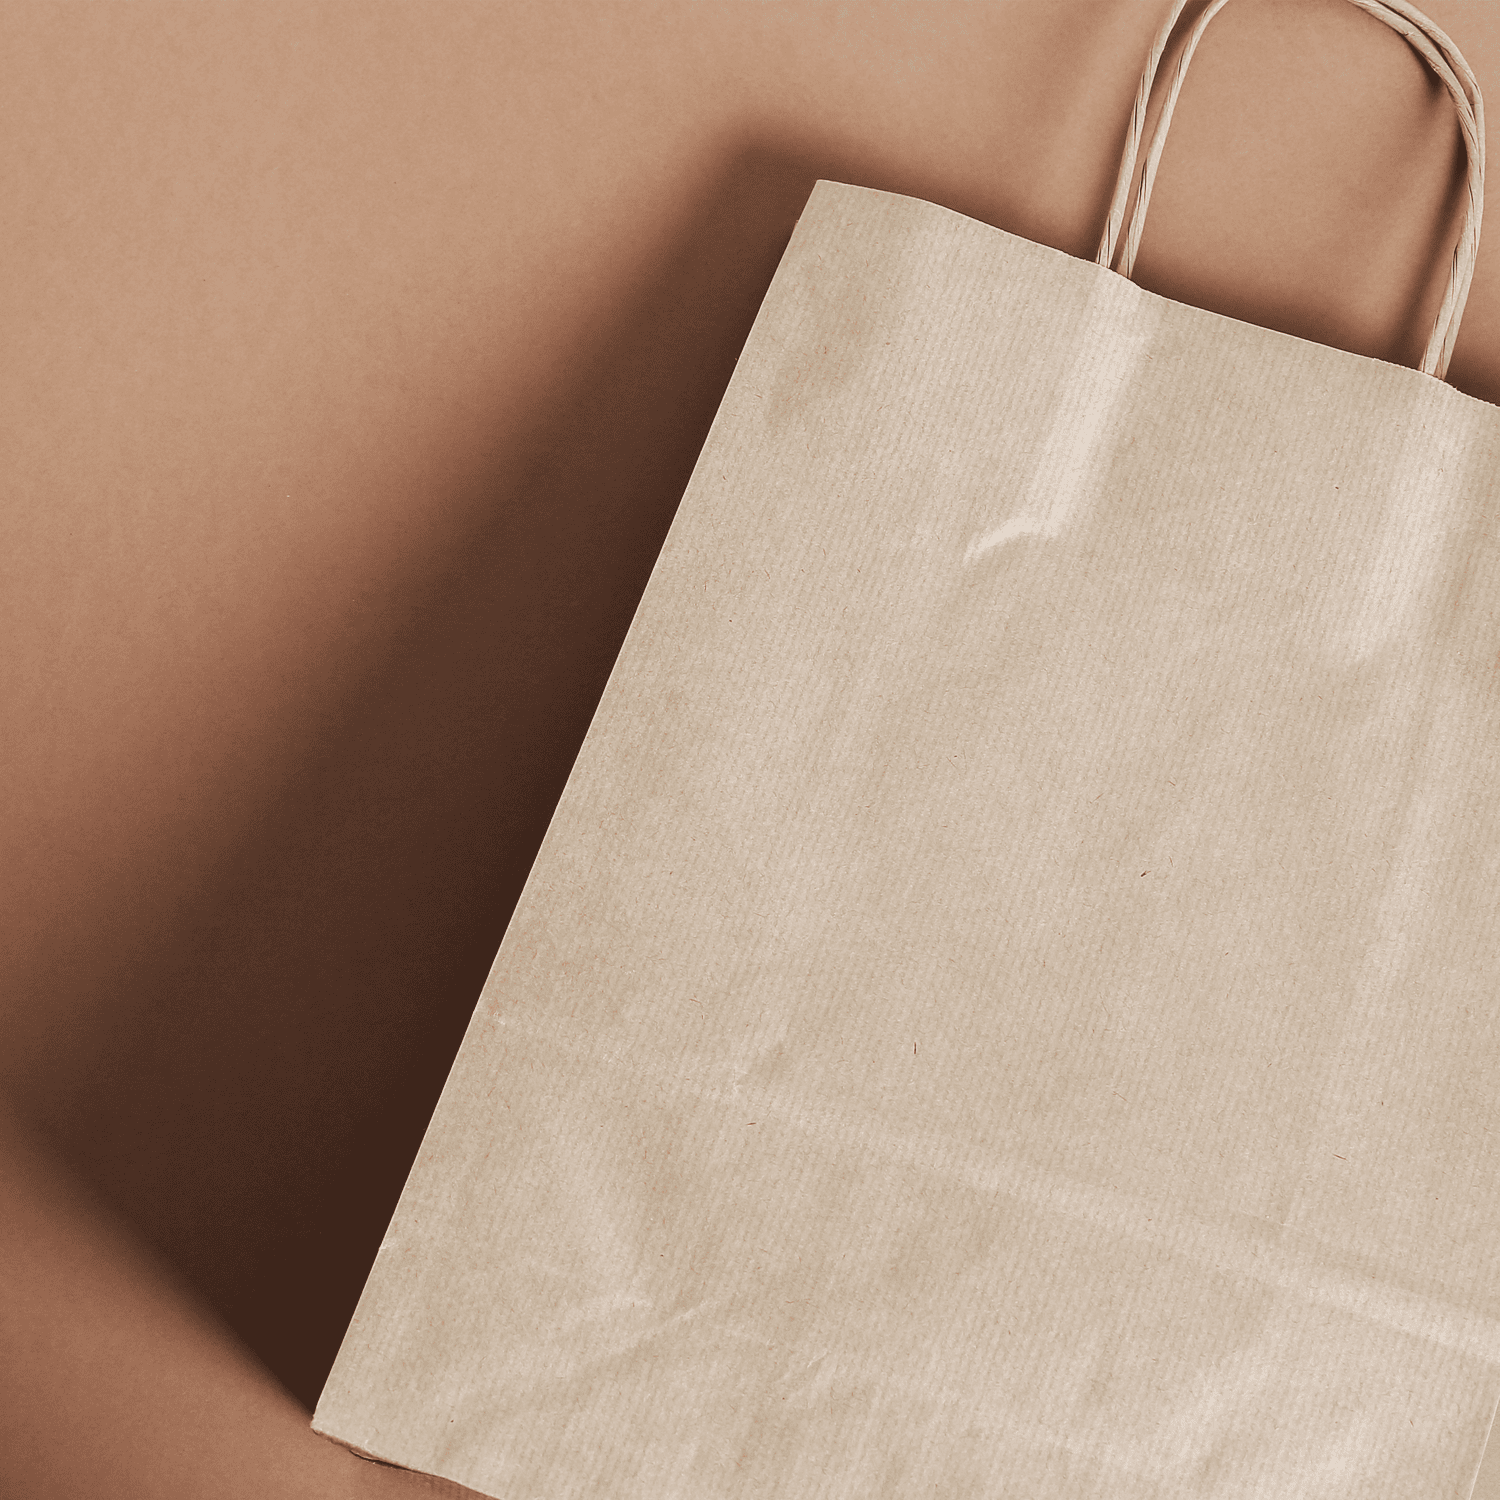 Choosing brown paper bags can help tackle pollution